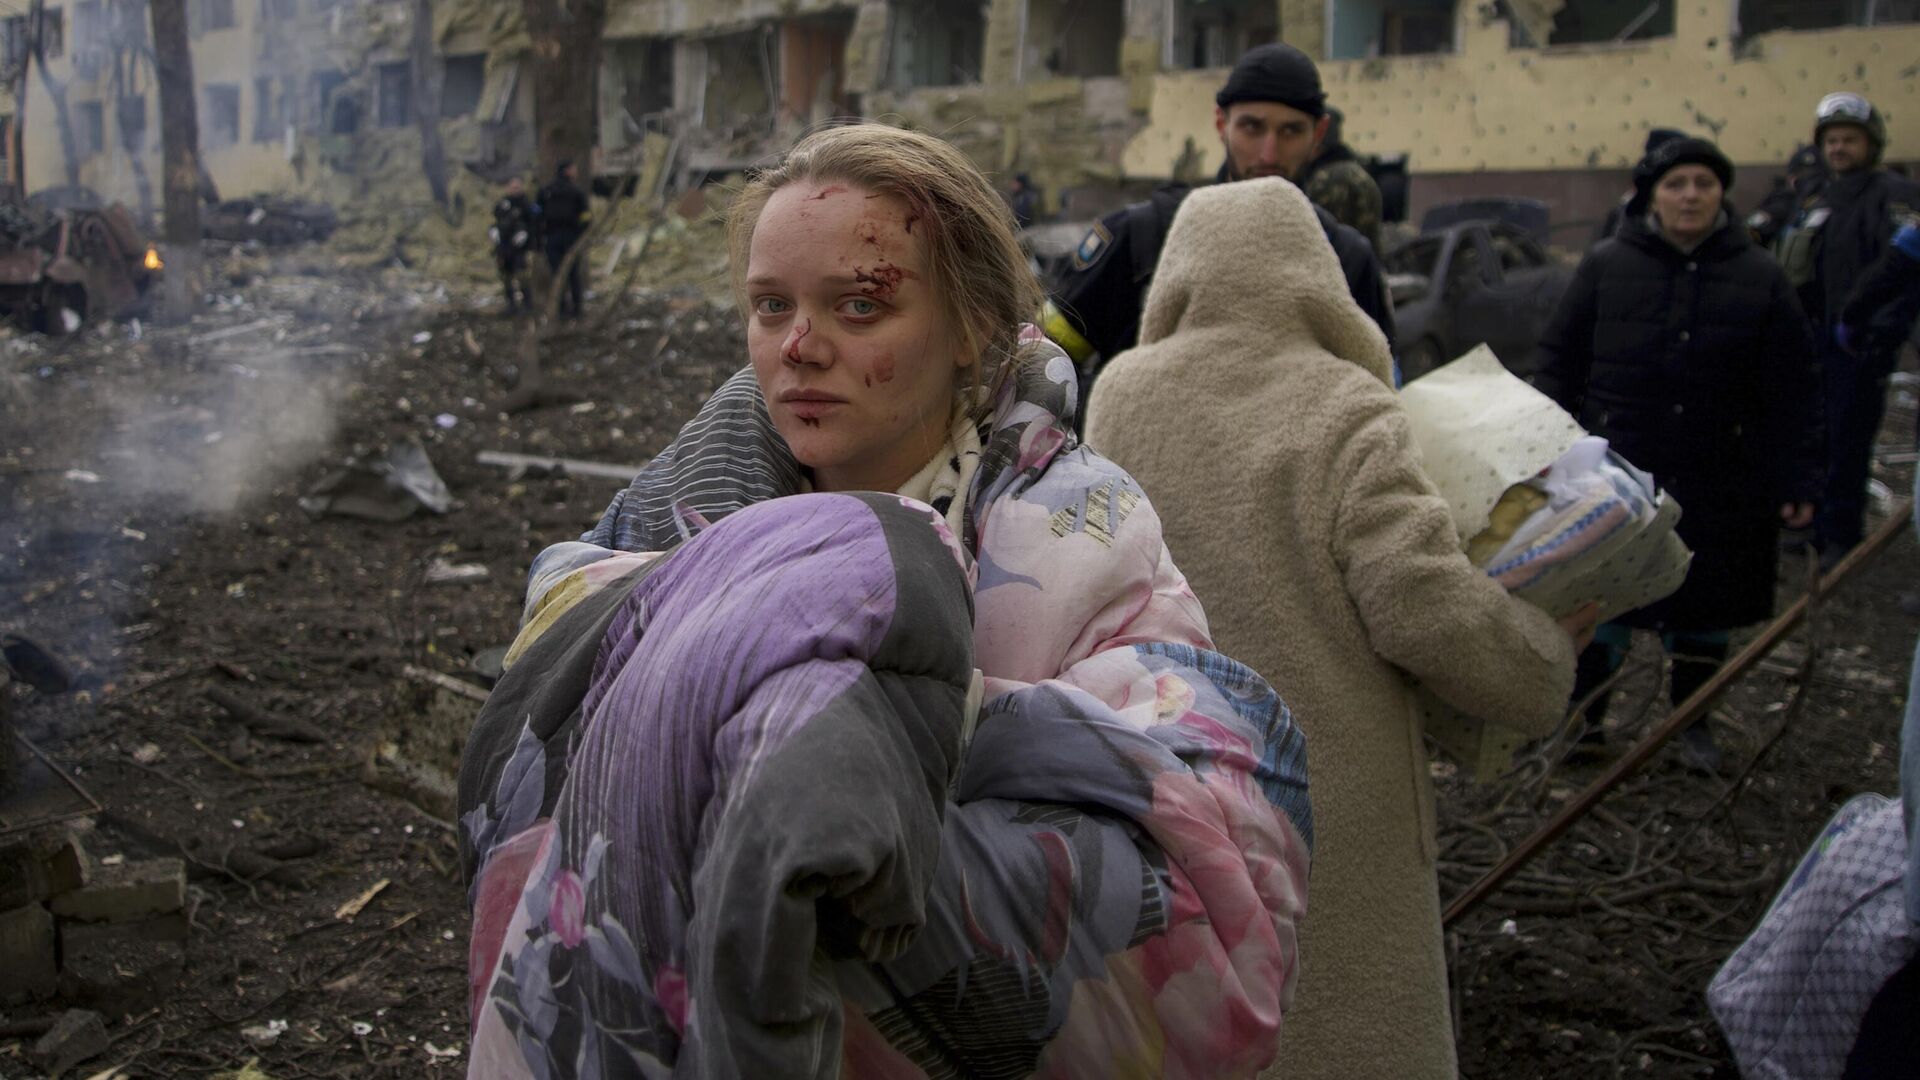 FILE - Mariana Vishegirskaya stands outside a maternity hospital that was damaged by shelling in Mariupol, Ukraine, Wednesday, March 9, 2022. Visheirskaya was taken to another nearby hospital where she gave birth the following day to a baby girl she named Veronika. “We were lying in wards when glass, frames, windows and walls flew apart,” she told AP, lying next to her newborn. We don’t know how it happened. We were in our wards and some had time to cover themselves. Some didn’t.” (AP Photo/Mstyslav Chernov, File) - Sputnik International, 1920, 02.04.2022